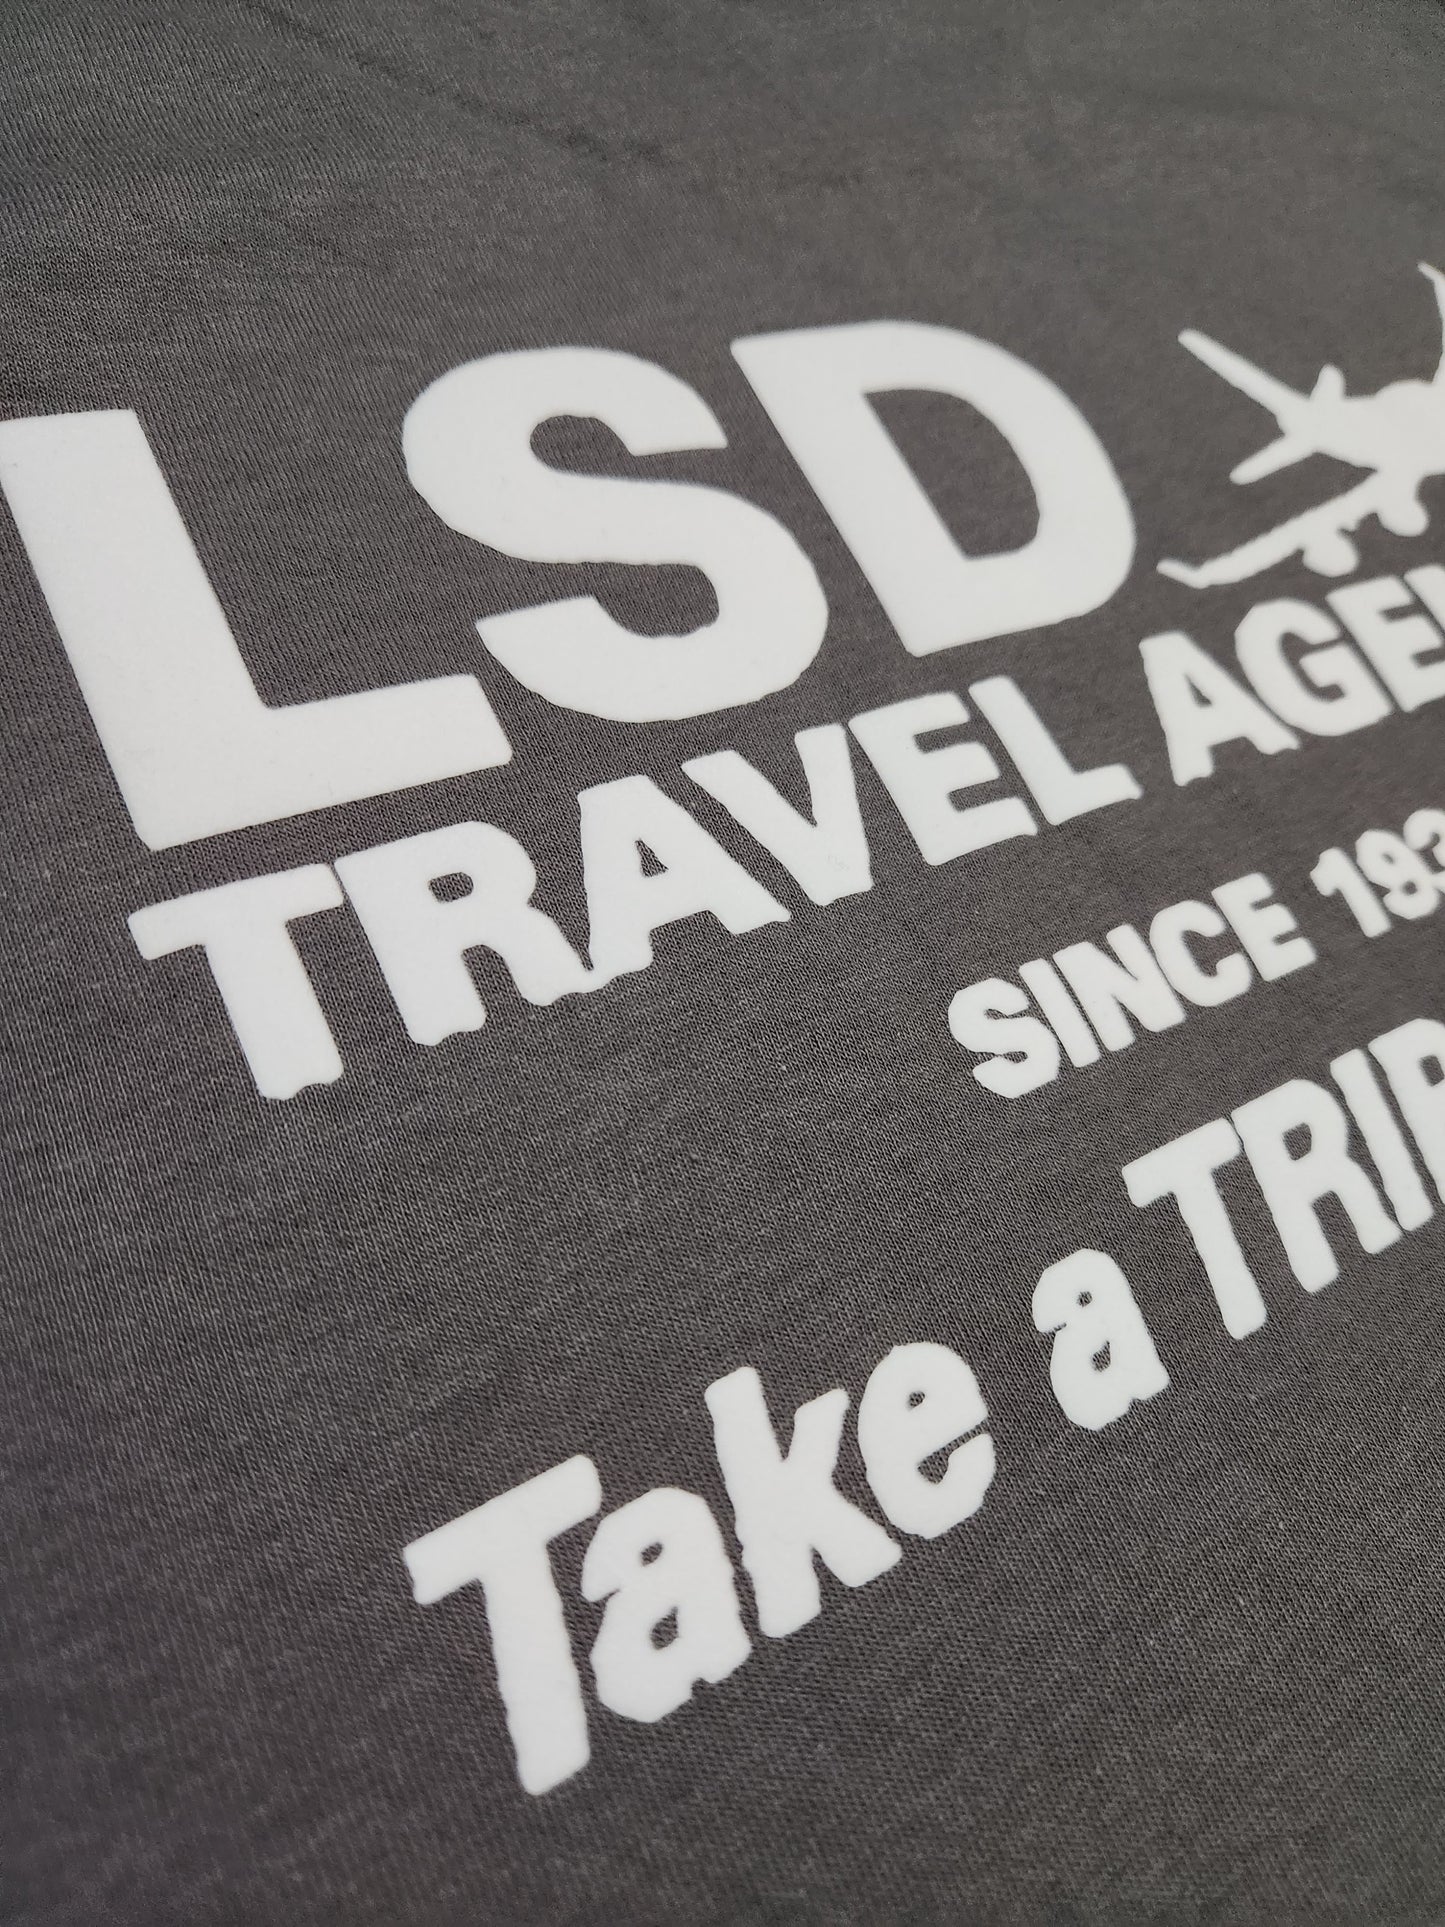 Take A Trip T-Shirt - Centre Ave Clothing Co.